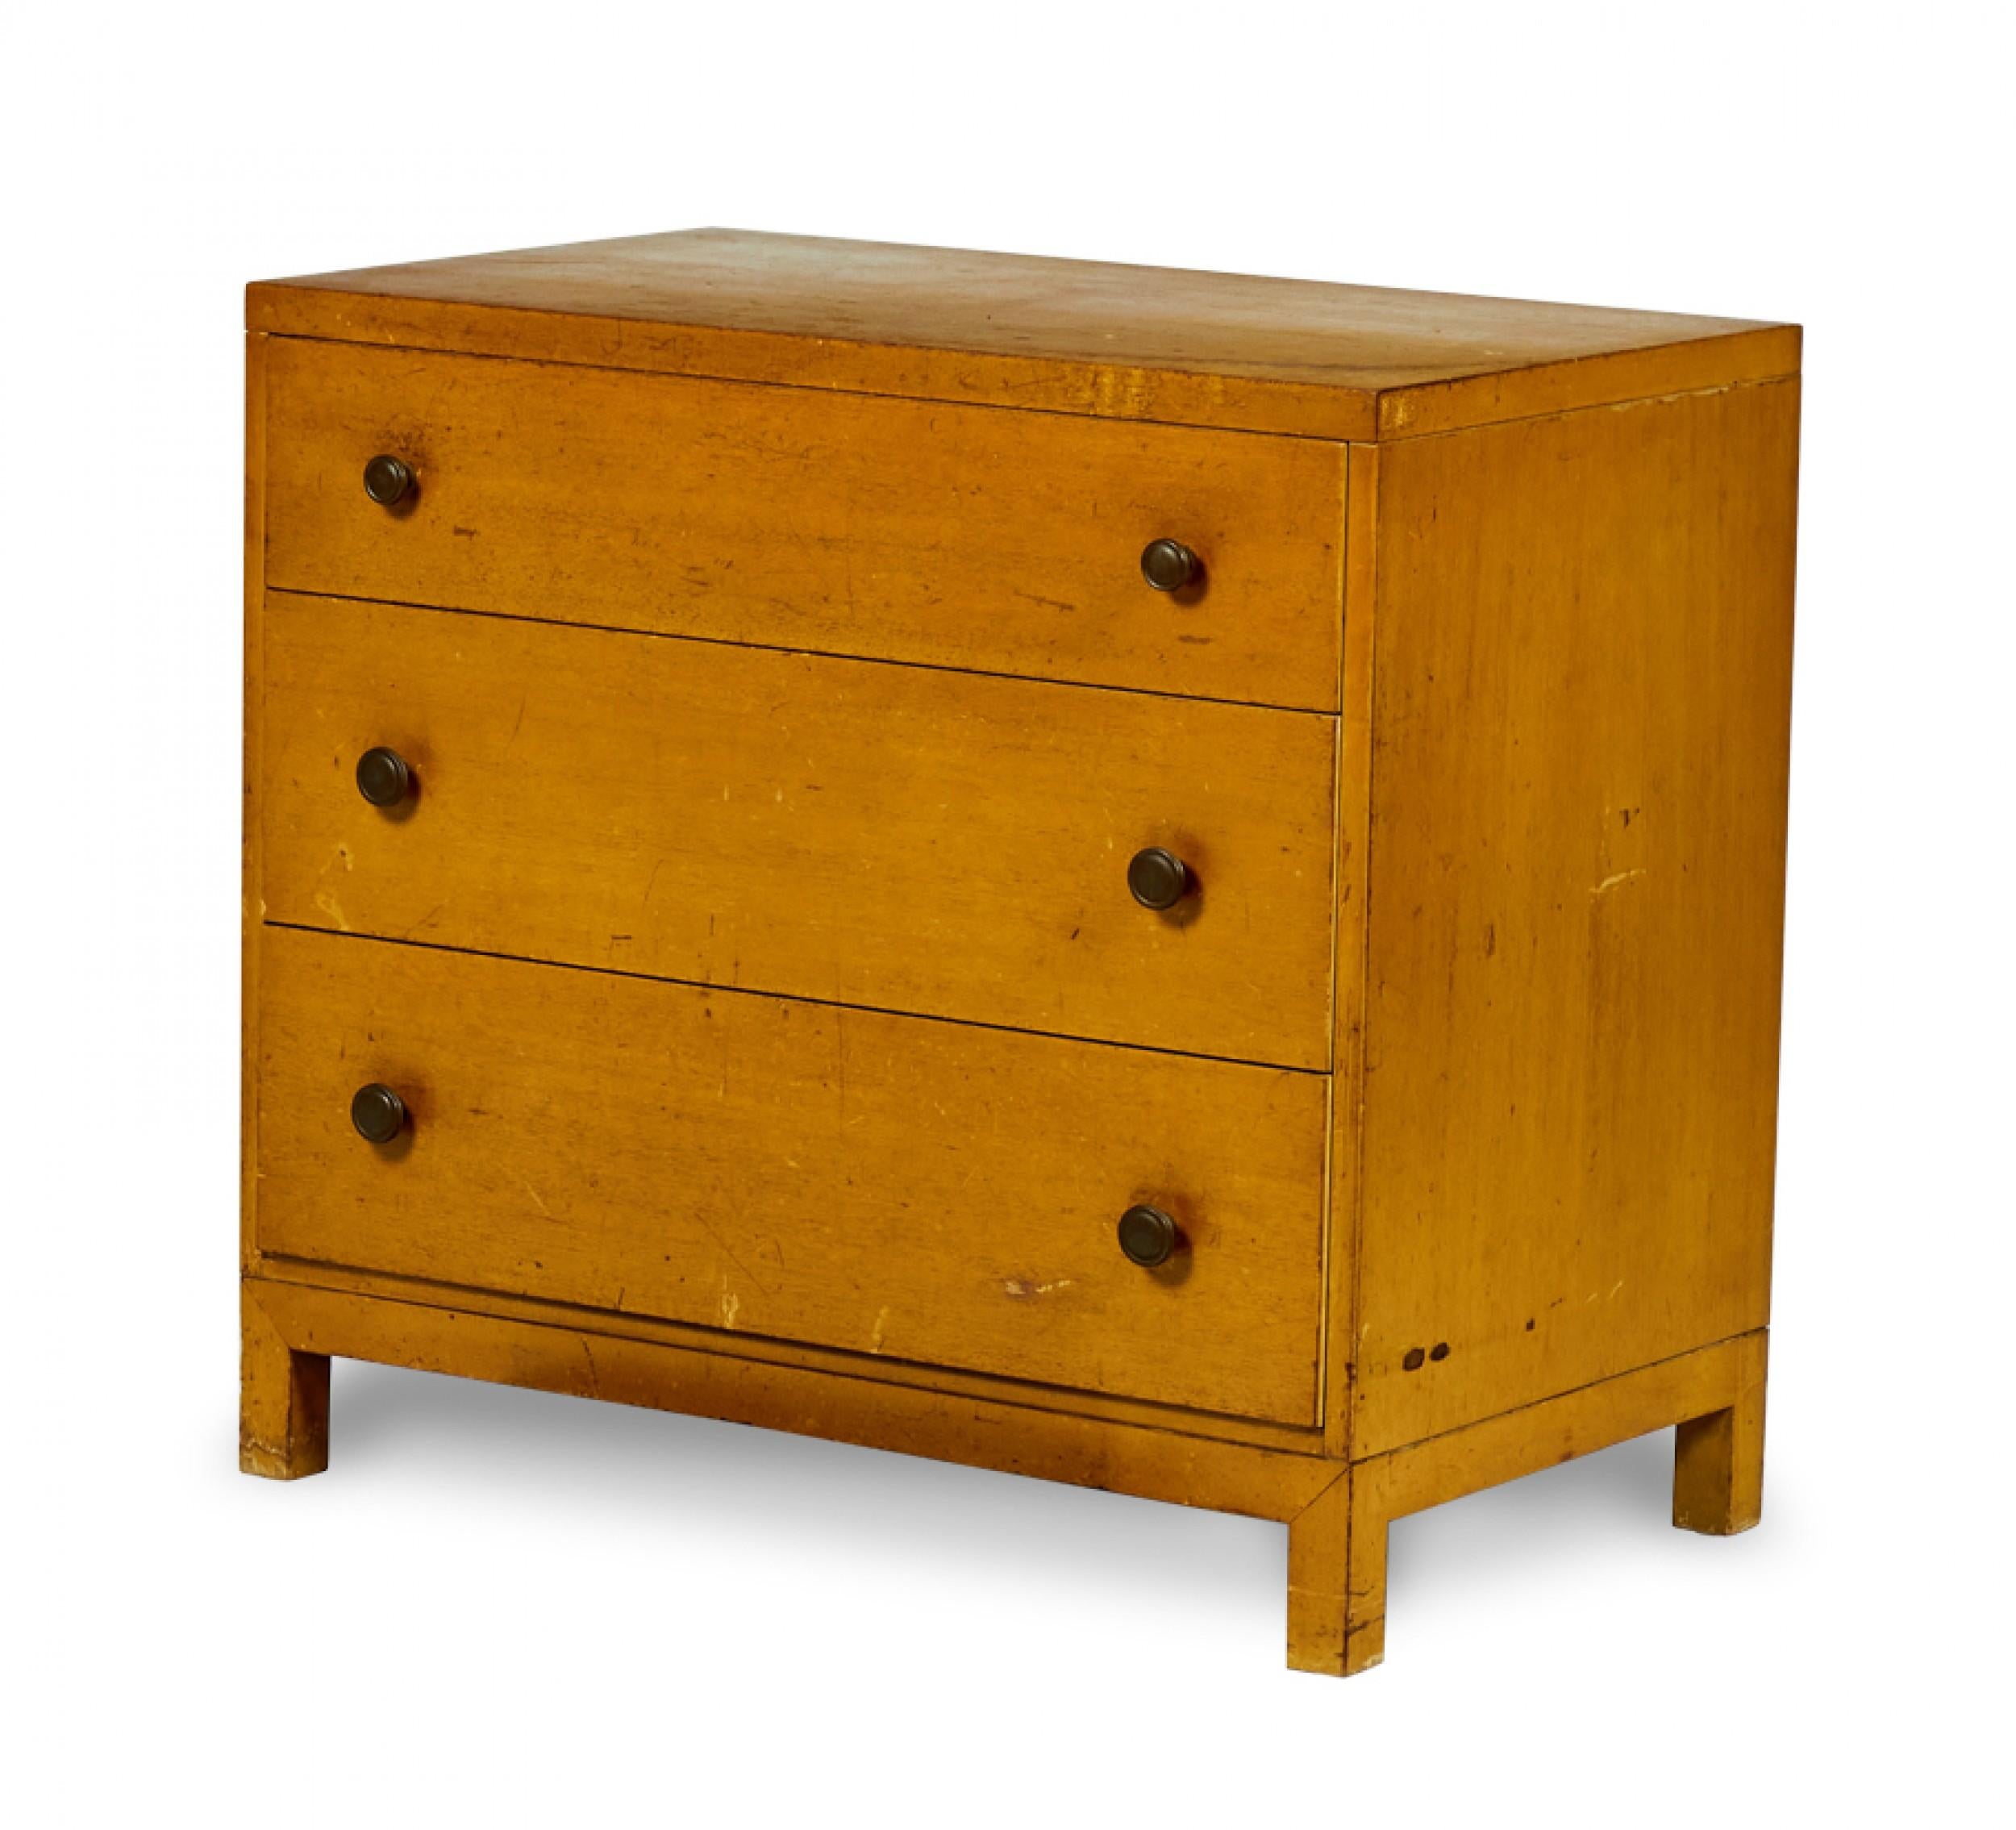 PAIR of American Mid-Century walnut commodes / chests with three drawers and round brass drawer handles resting on bracket-shaped bases with four legs. (WIDDICOMB MODERN)(PRICED AS PAIR(Similar chest: DUF0151C)
